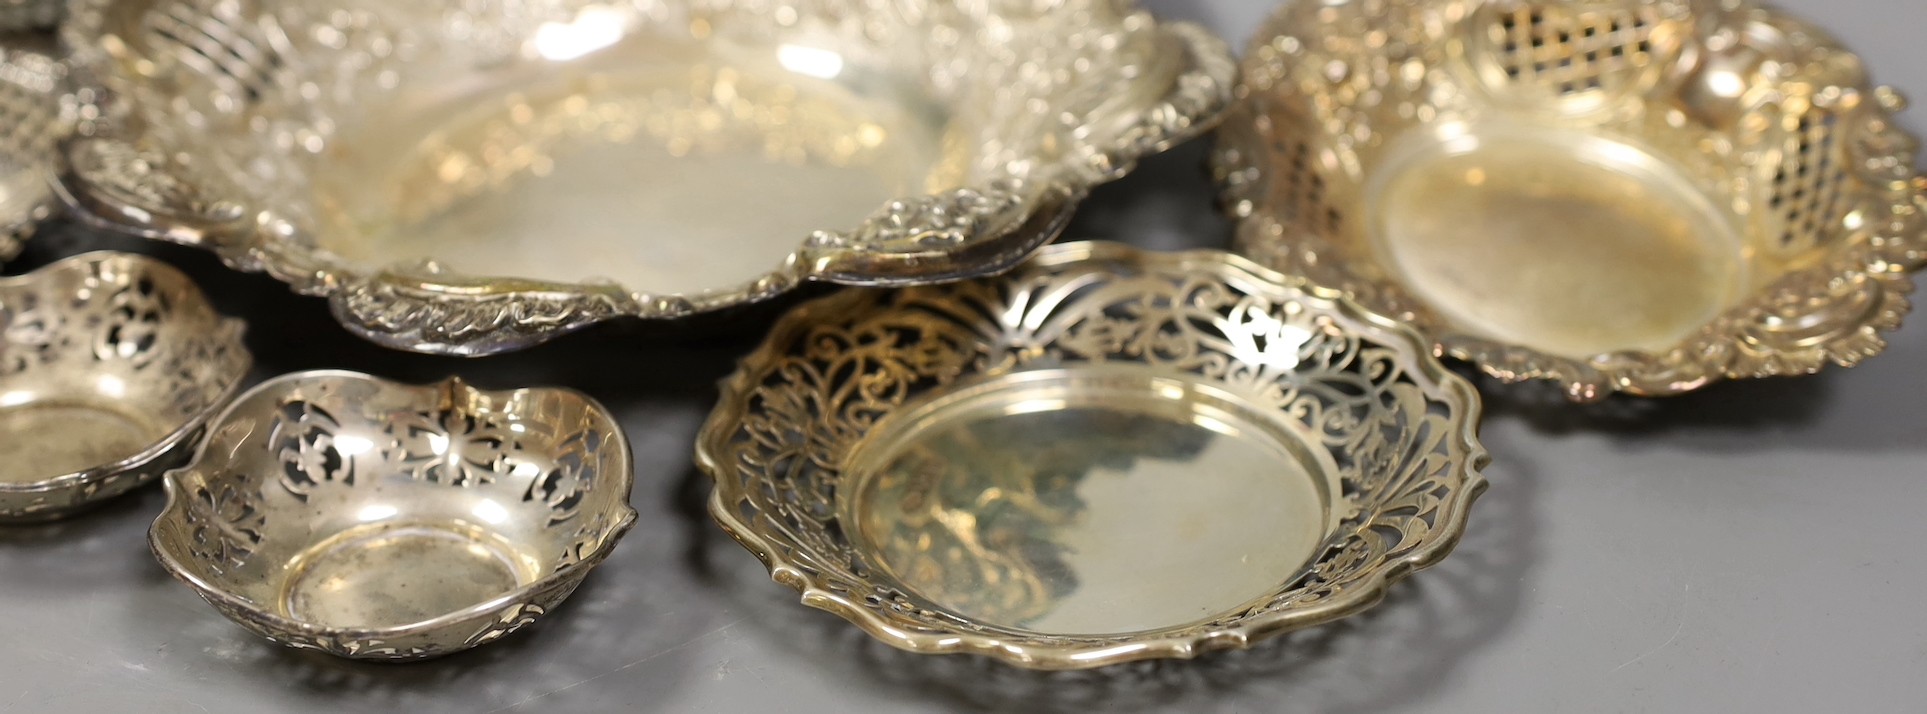 Seven assorted Victorian and later pierced silver nut or bonbon dishes, largest 22.6cm in diameter, 19.4oz.